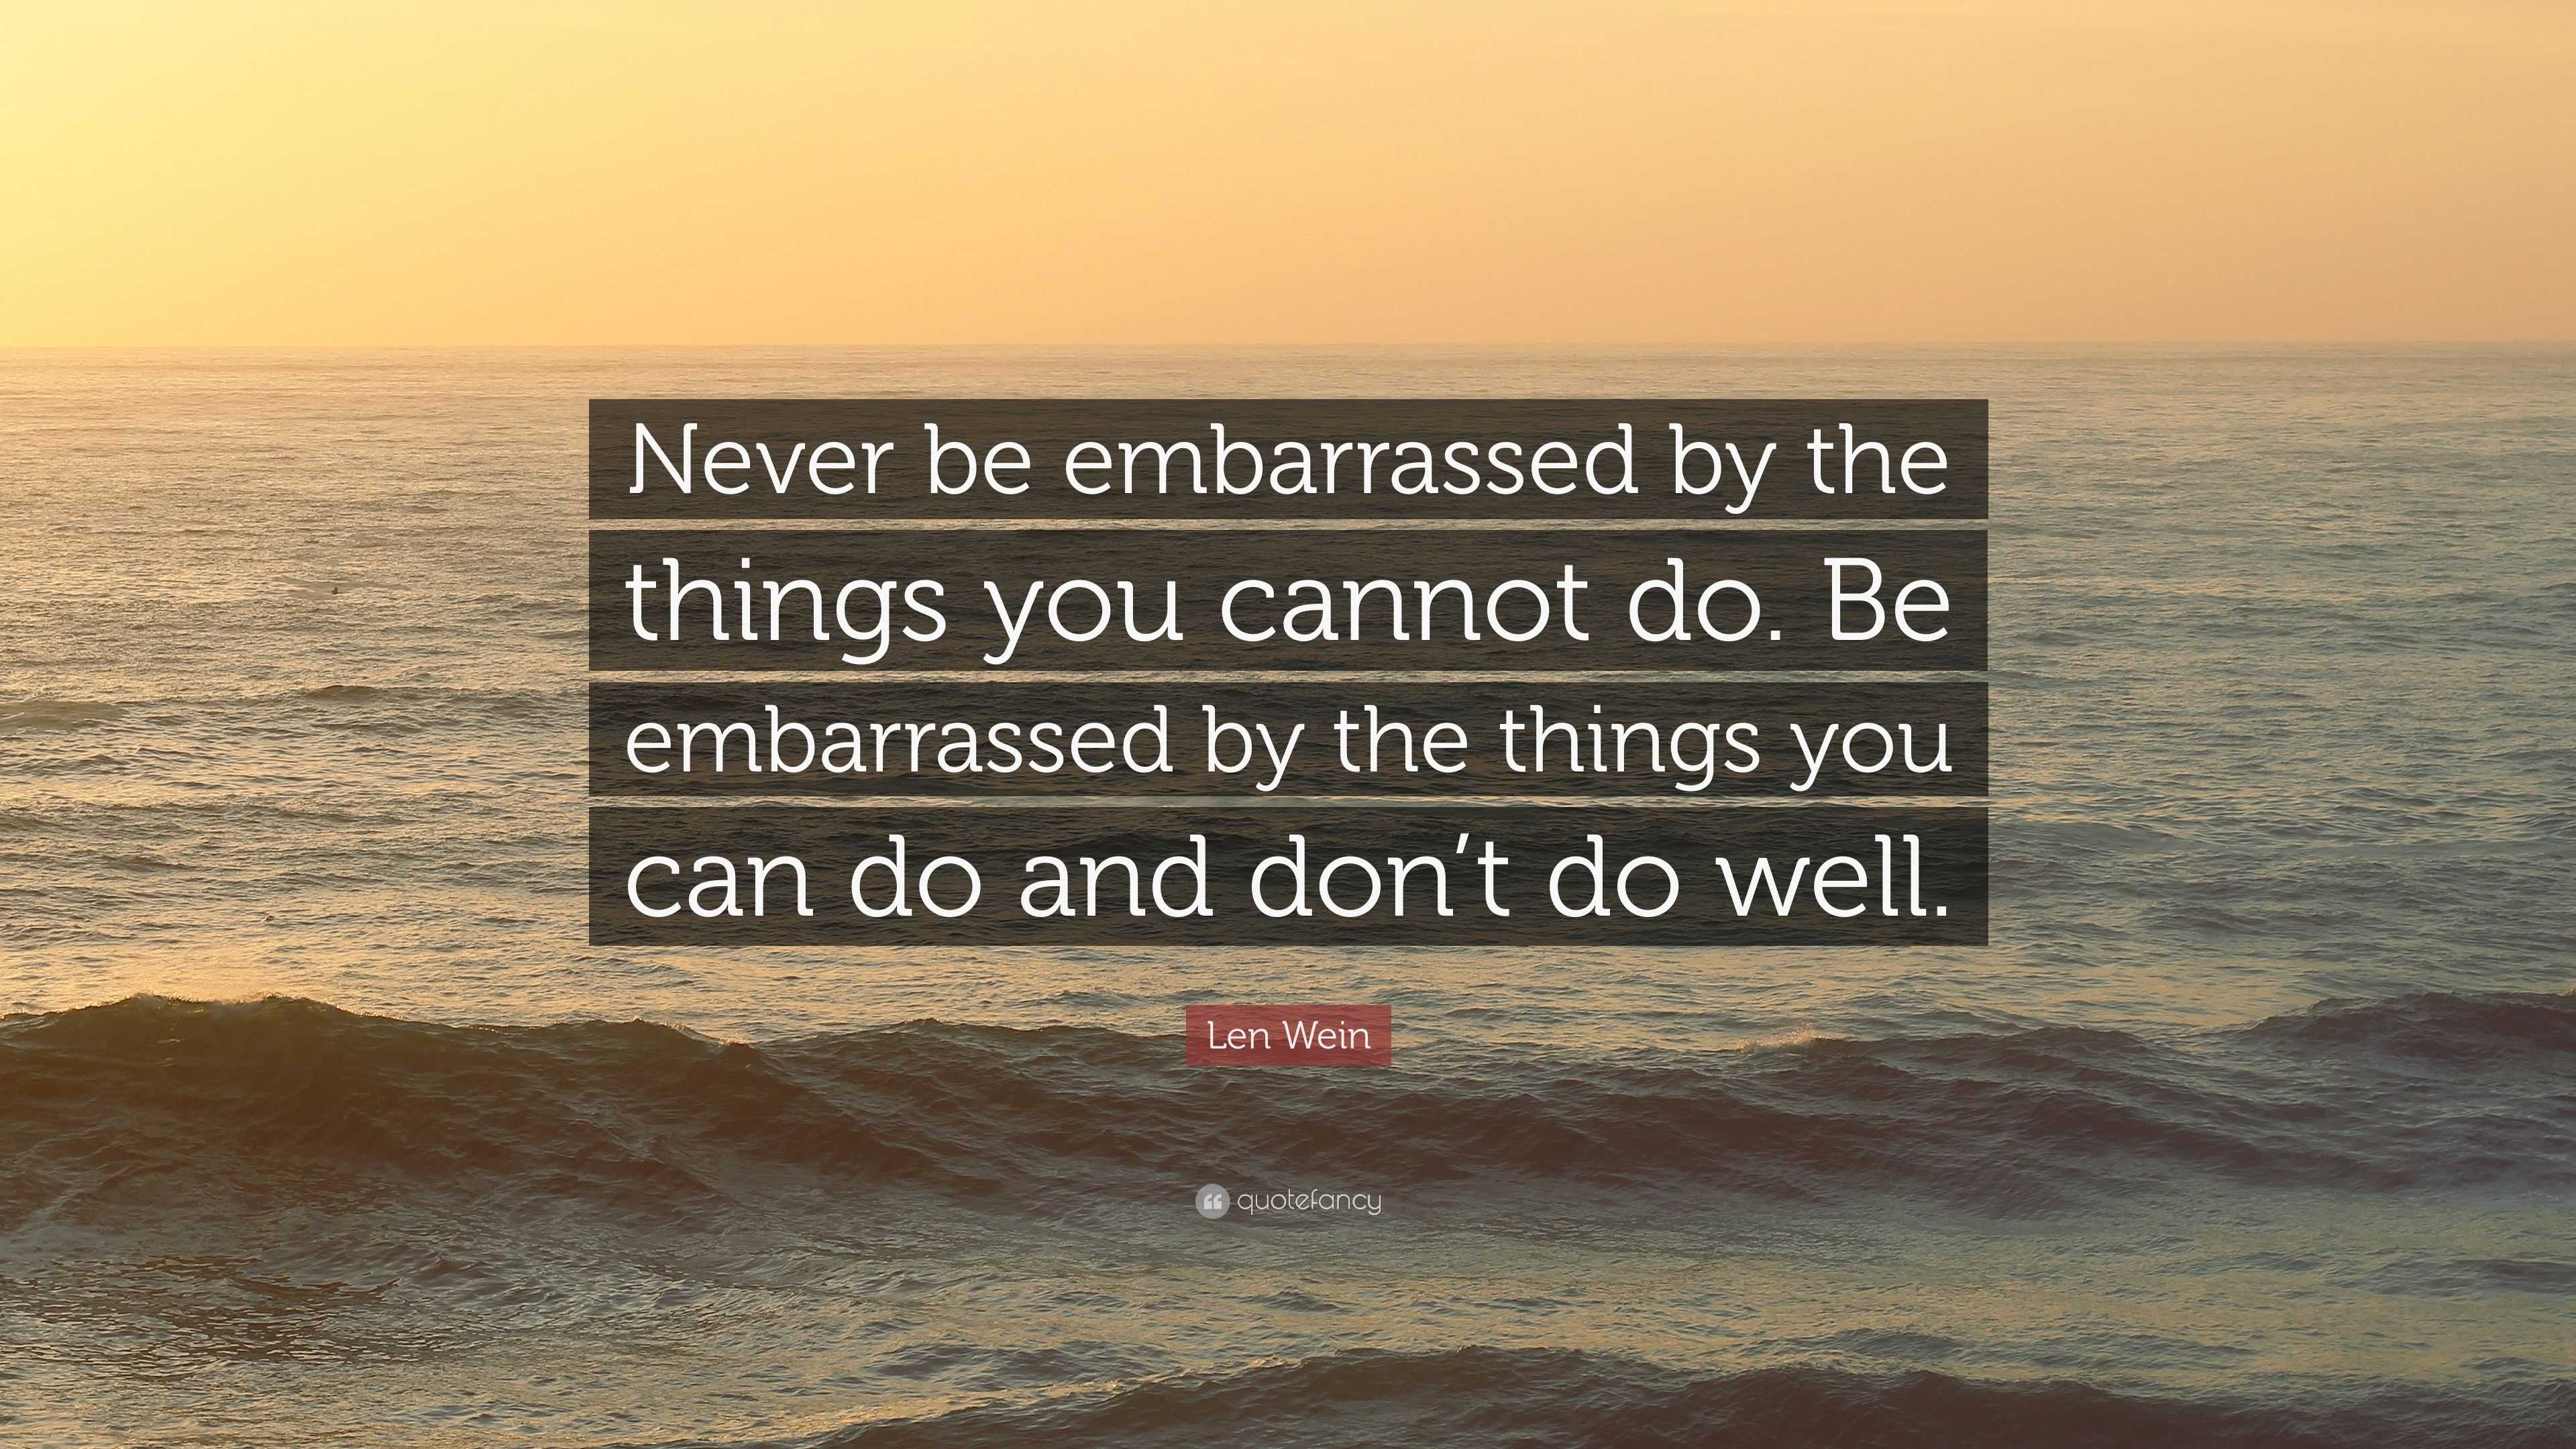 Len Wein Quote “never Be Embarrassed By The Things You Cannot Do Be Embarrassed By The Things